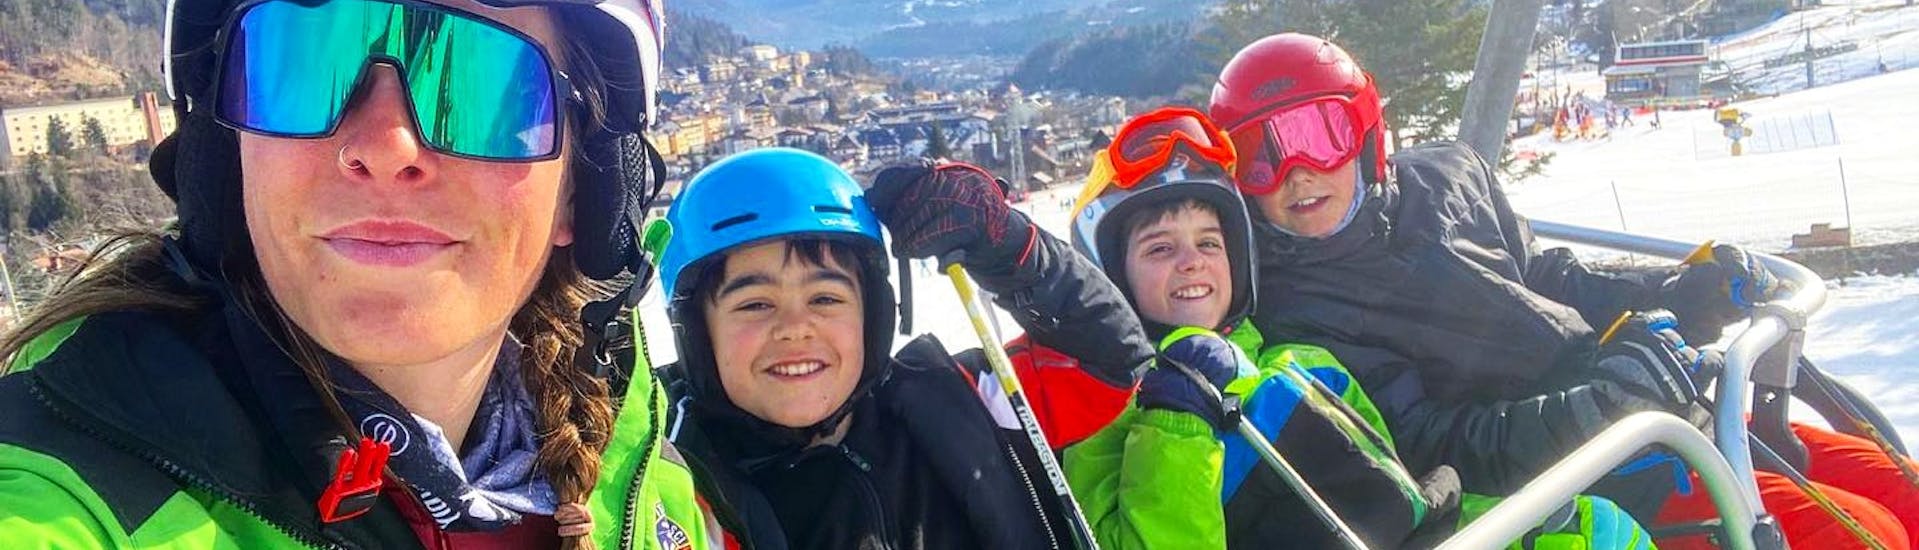 Kids Ski Lessons (4-15 y.) for All Levels - 4 Weekends.